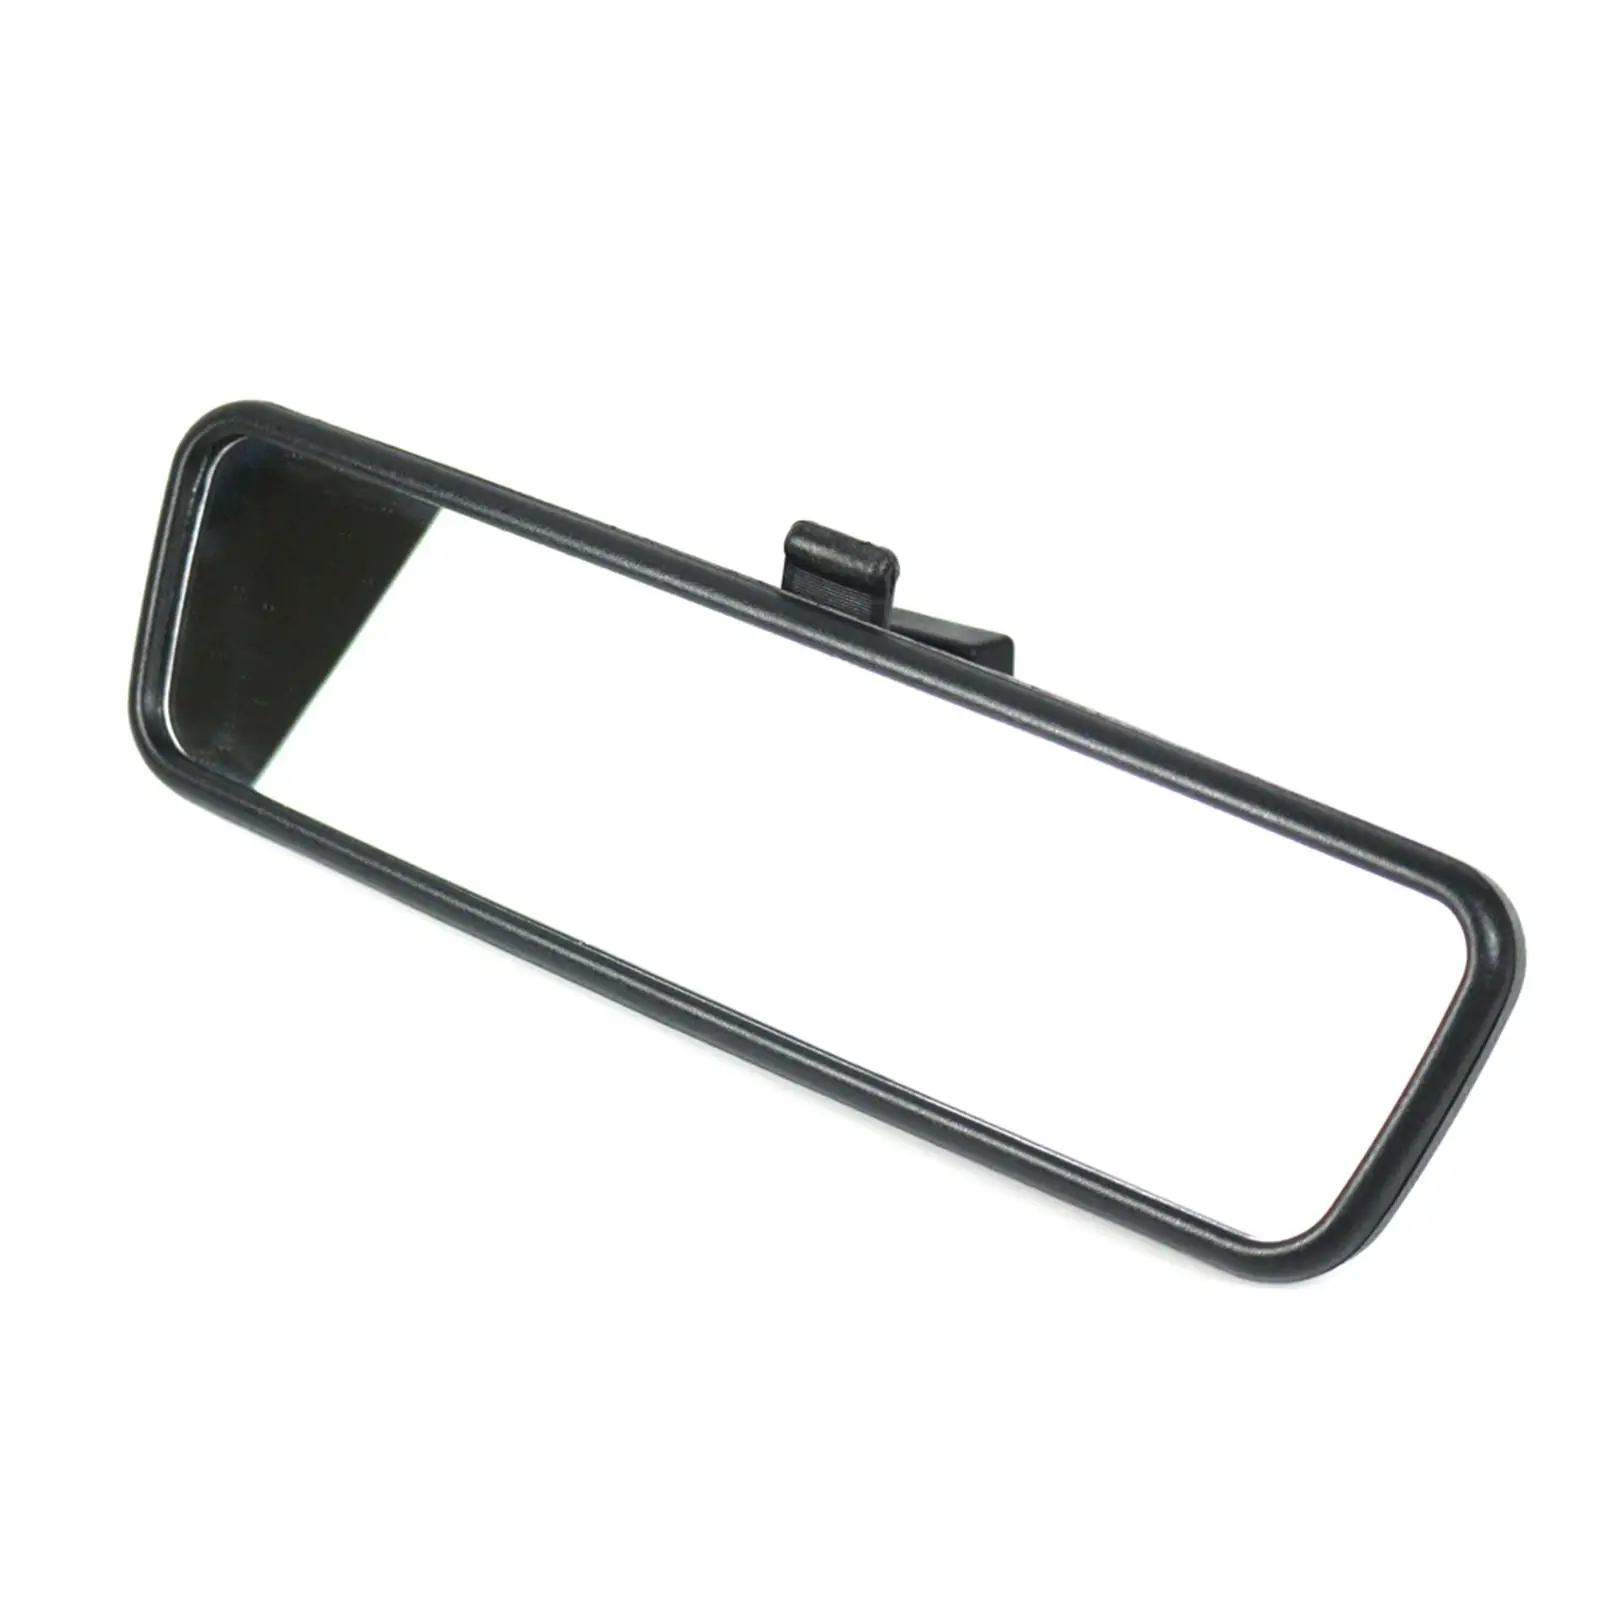 Interior Rear View Mirror 814842 Rearview Mirror for Citroen C1 High Performance